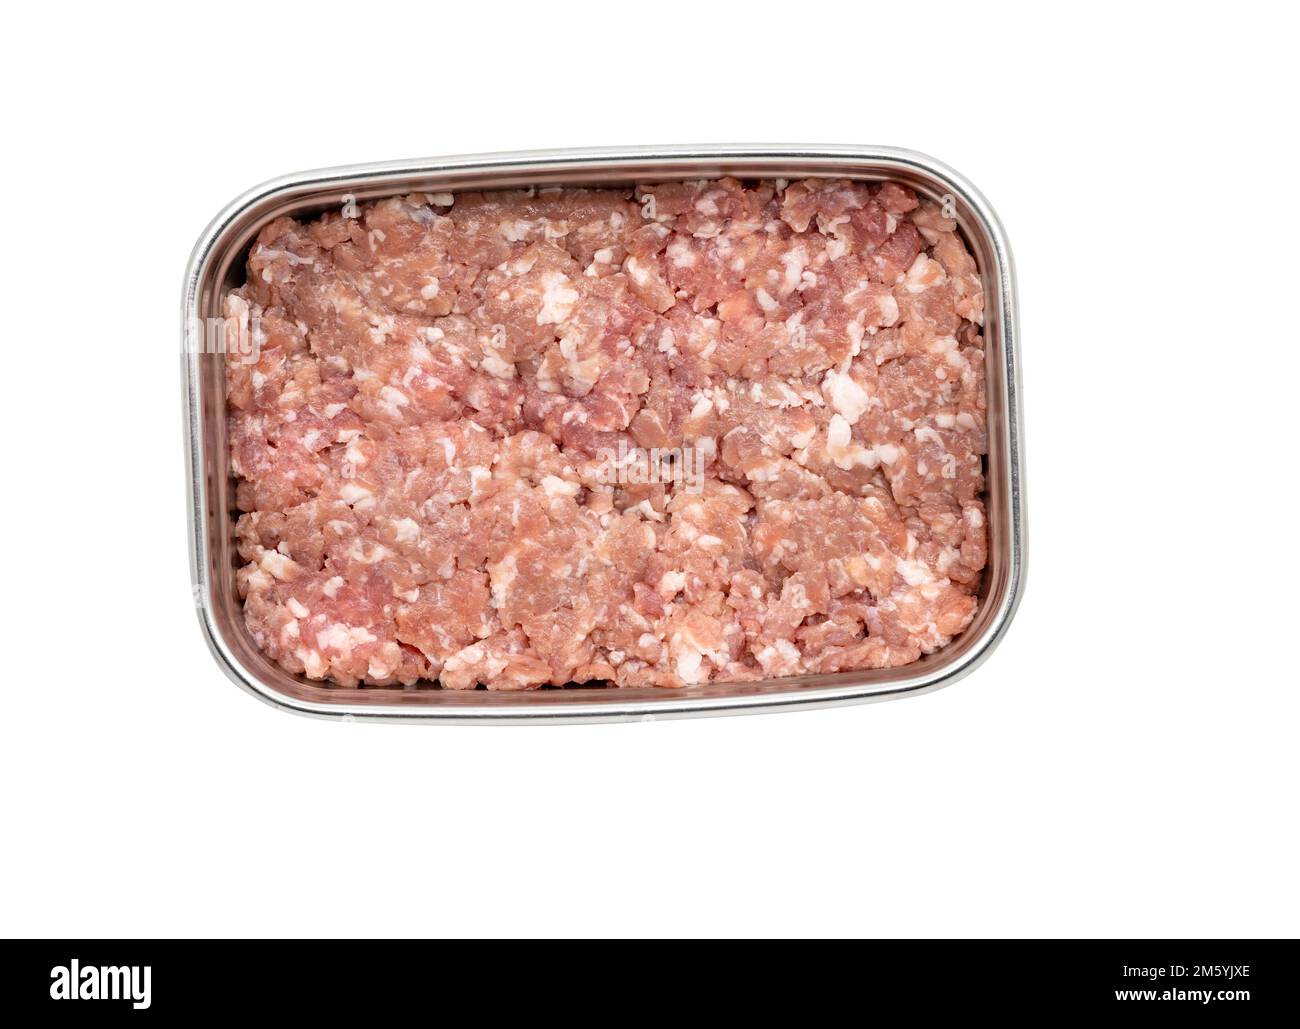 Isolated ground pork or minced pork in a stainless steel container on white background, above view. Stock Photo